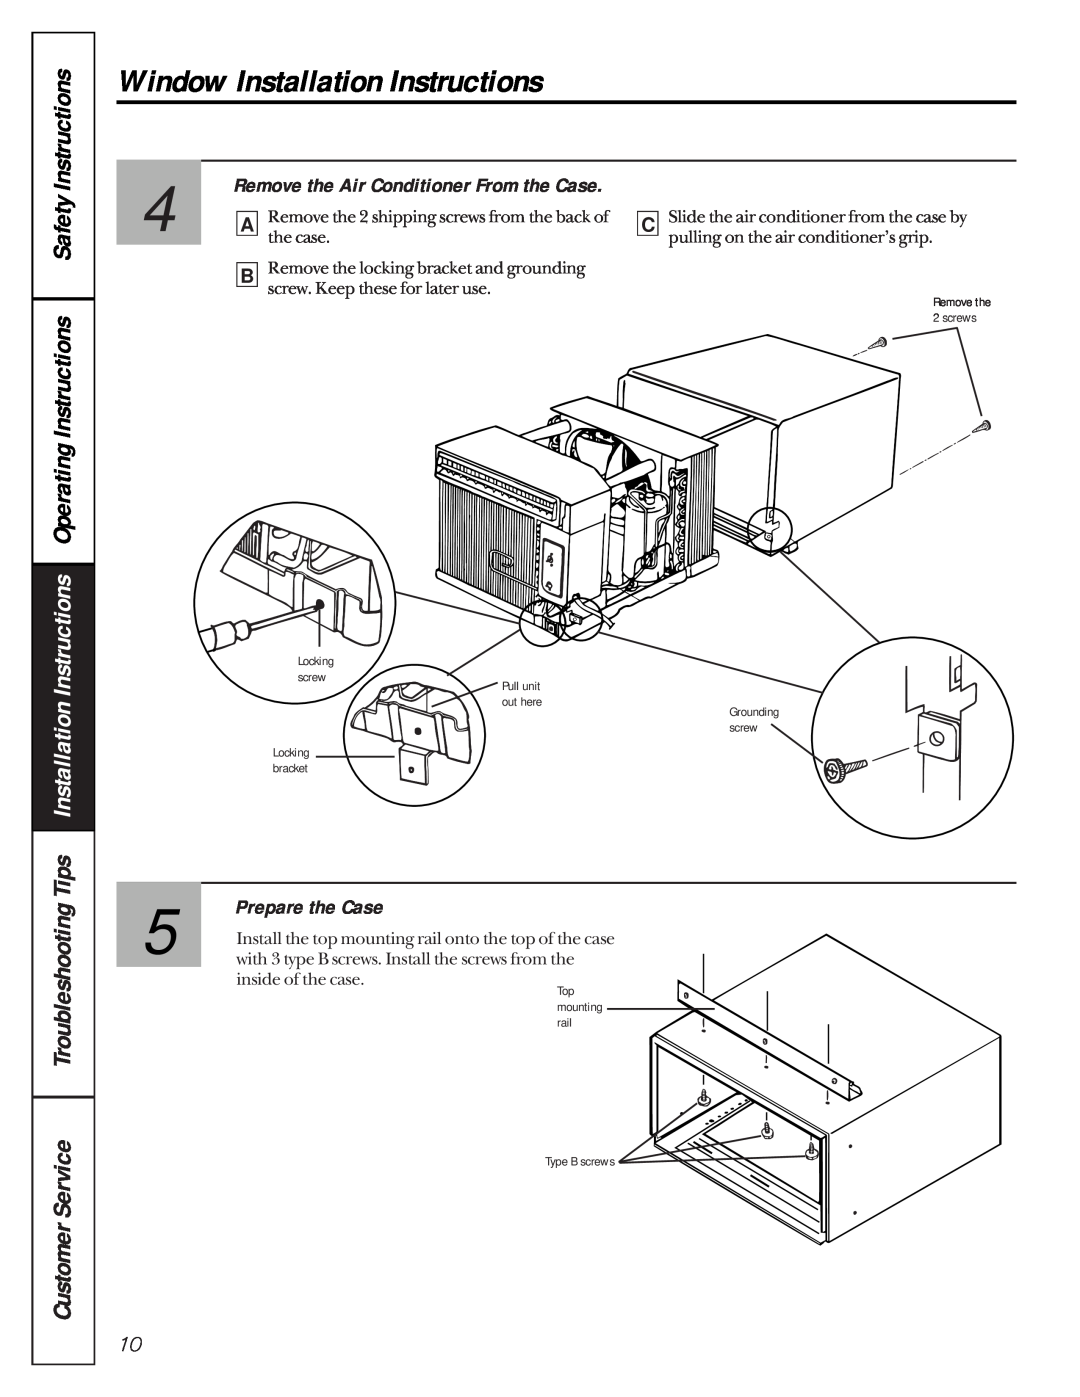 GE AMH12, AMH10 owner manual Prepare the Case, Remove the Air Conditioner From the Case, Window Installation Instructions 